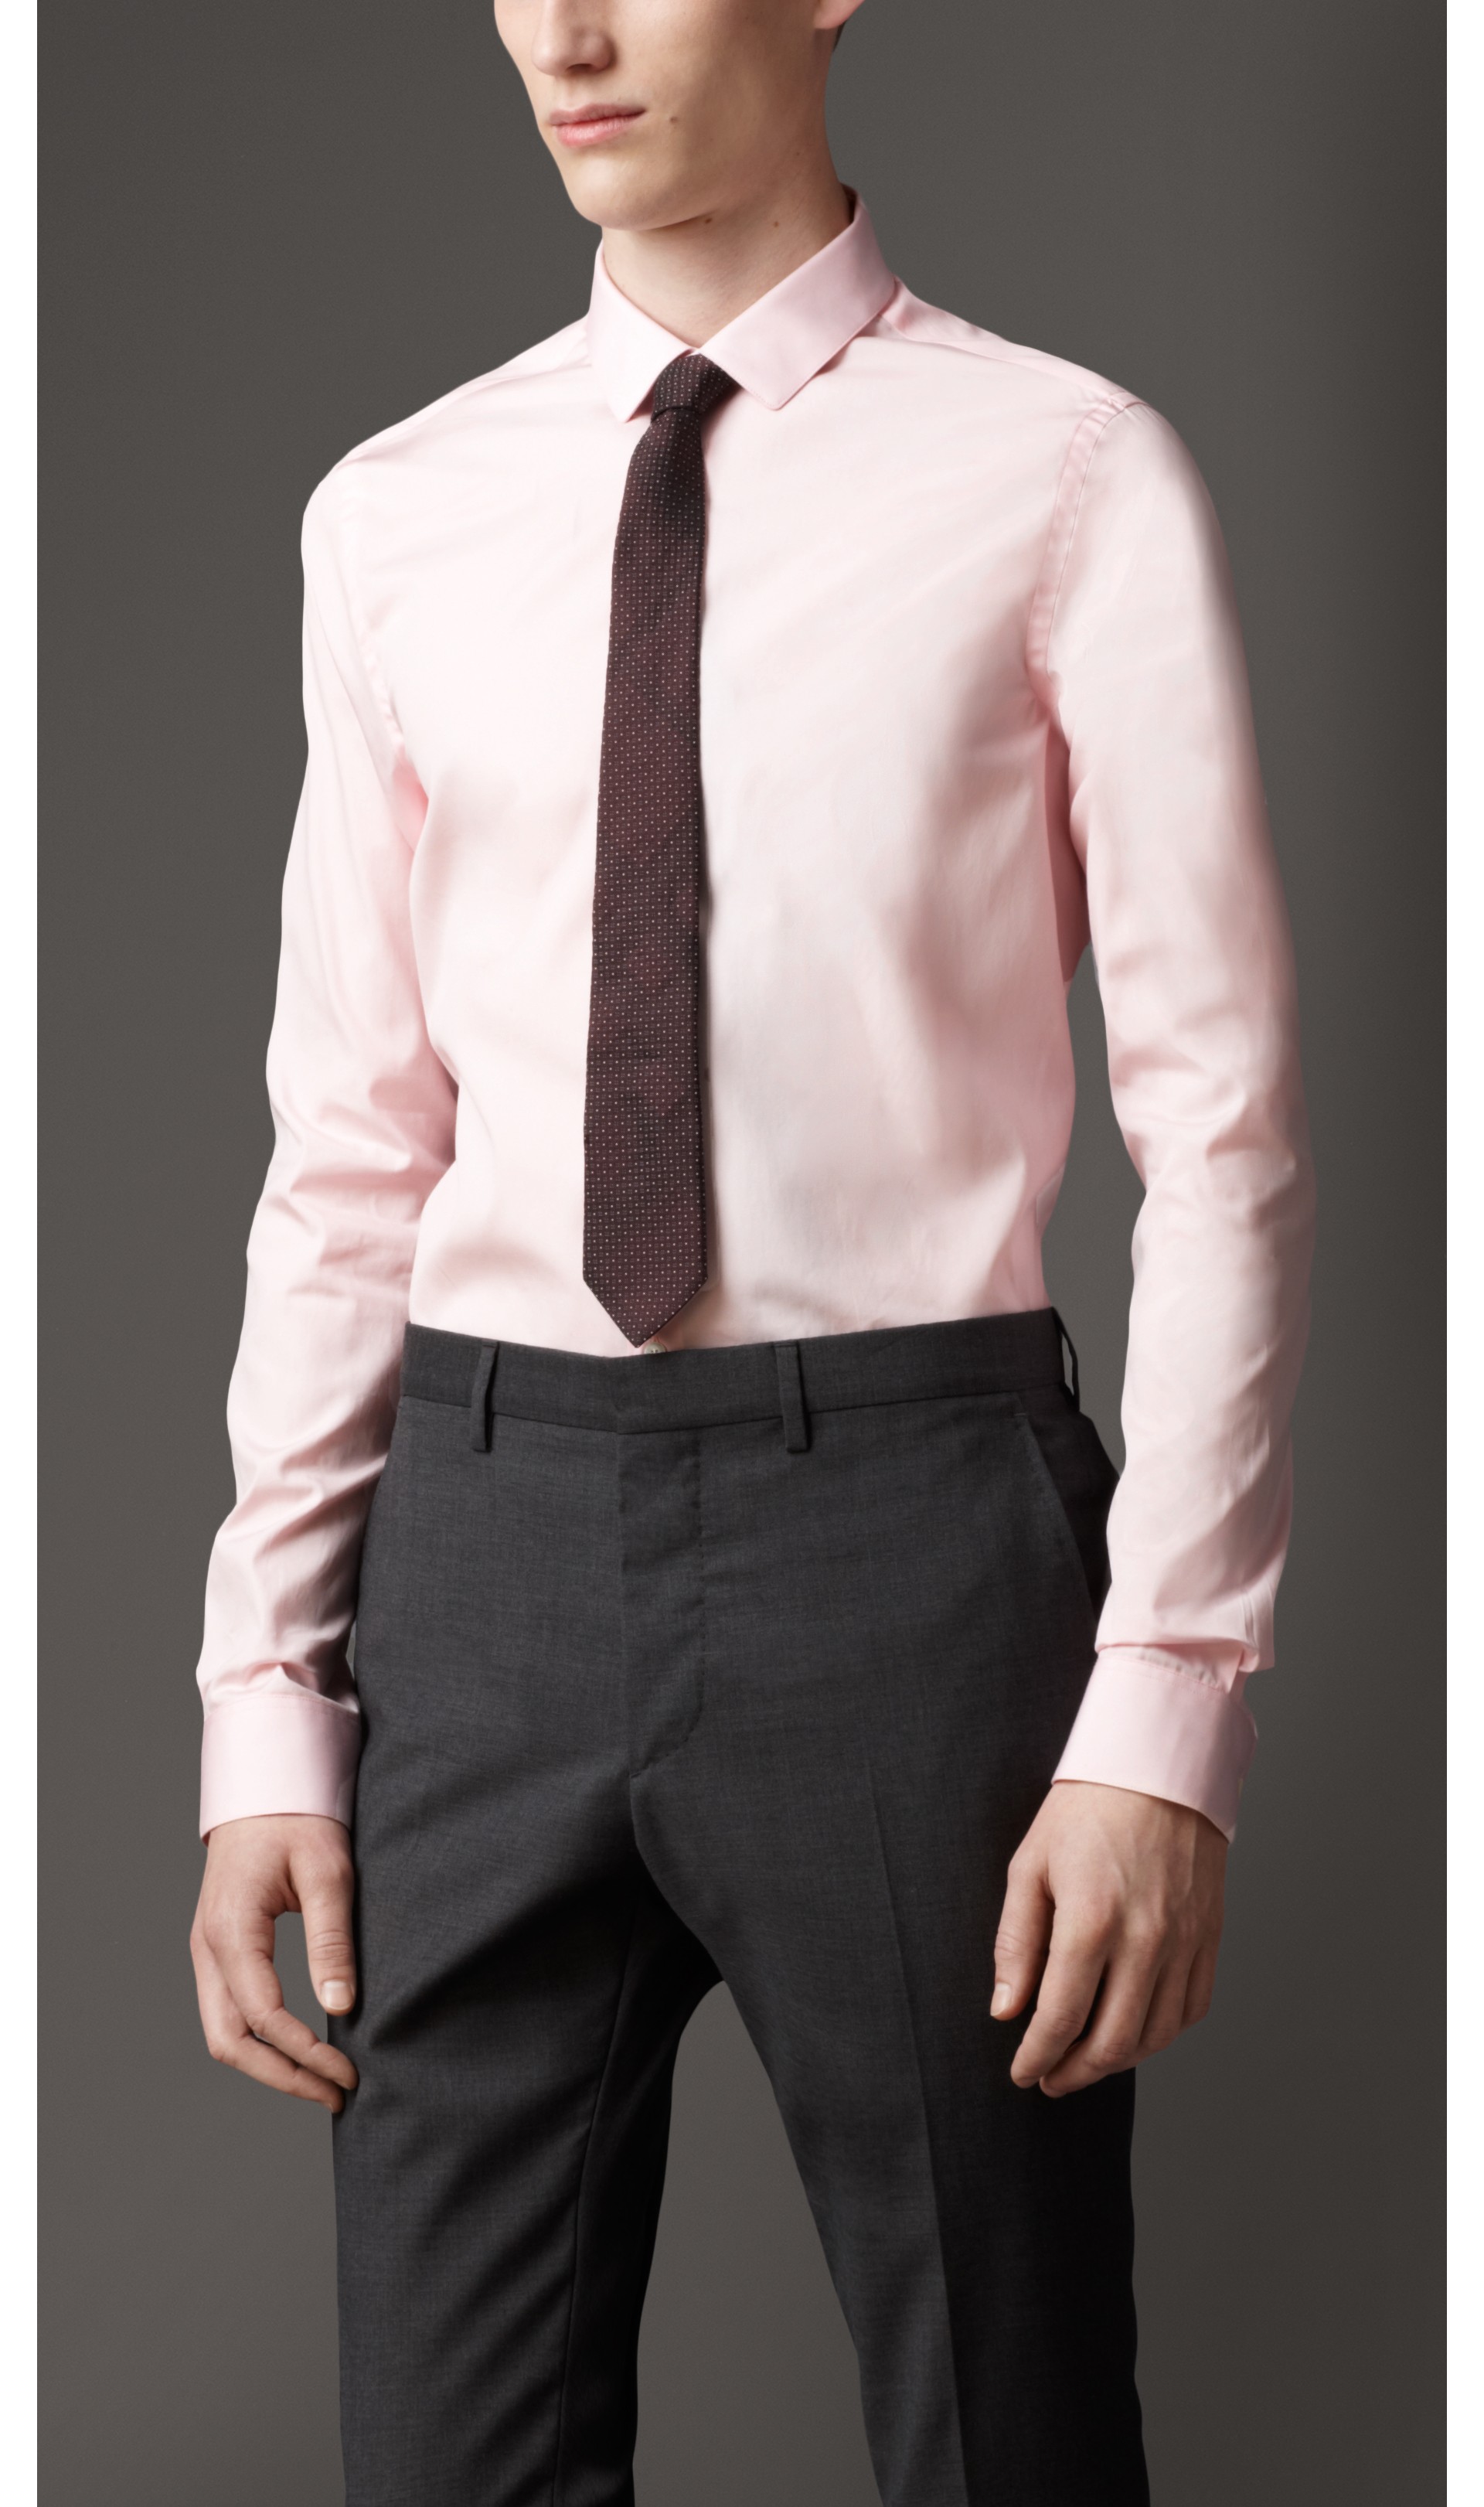 Slim Fit Cotton Shirt in City Pink - Men | Burberry United States